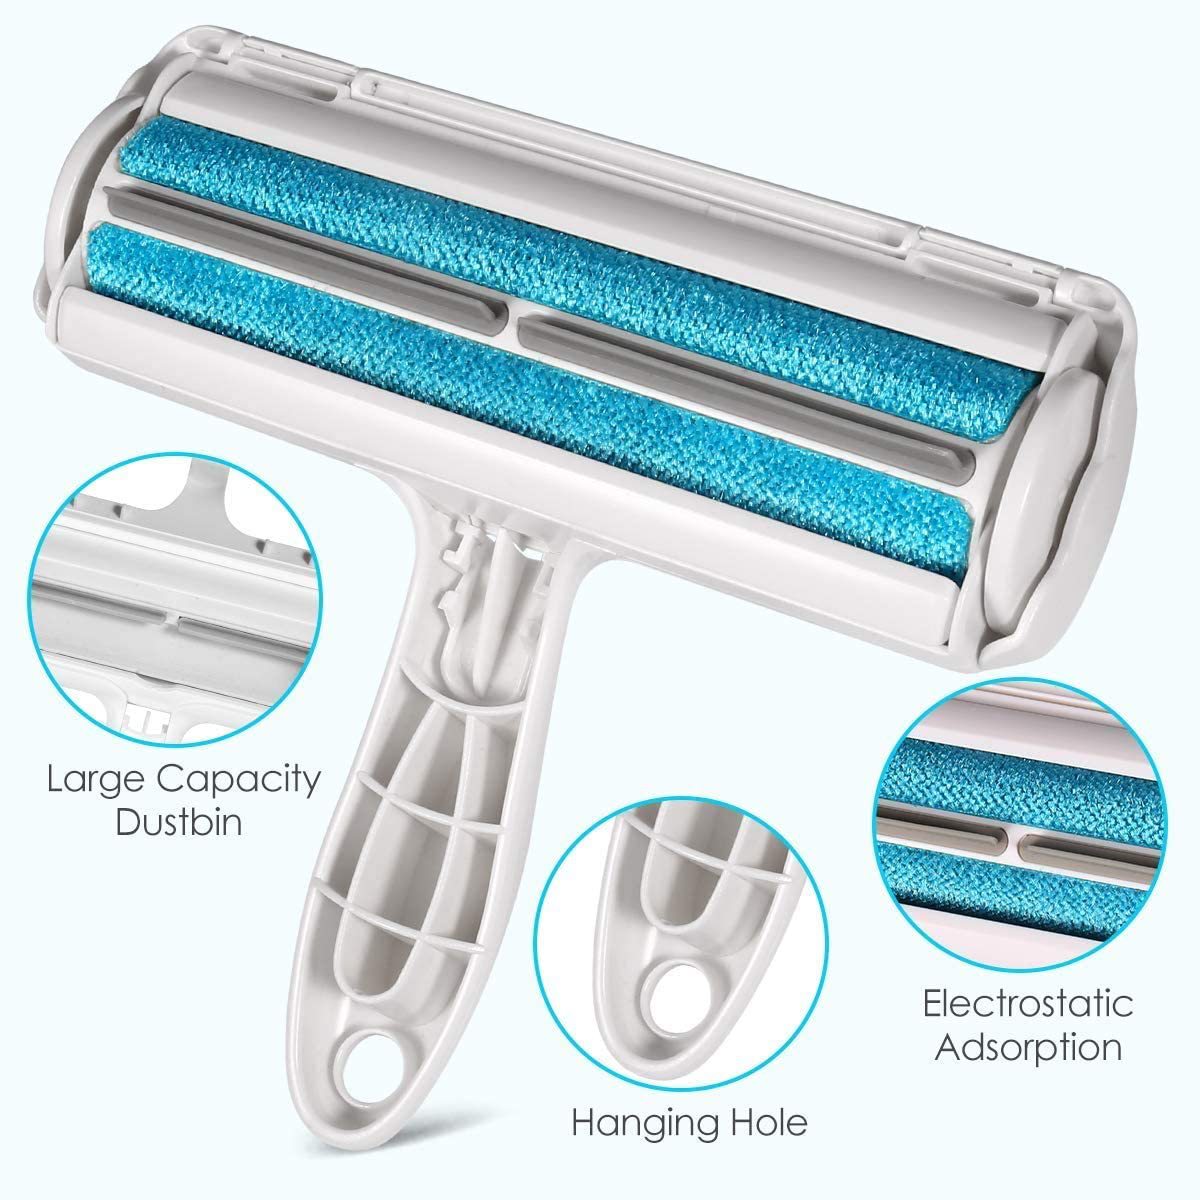 SELF-CLEANING PET HAIR REMOVER